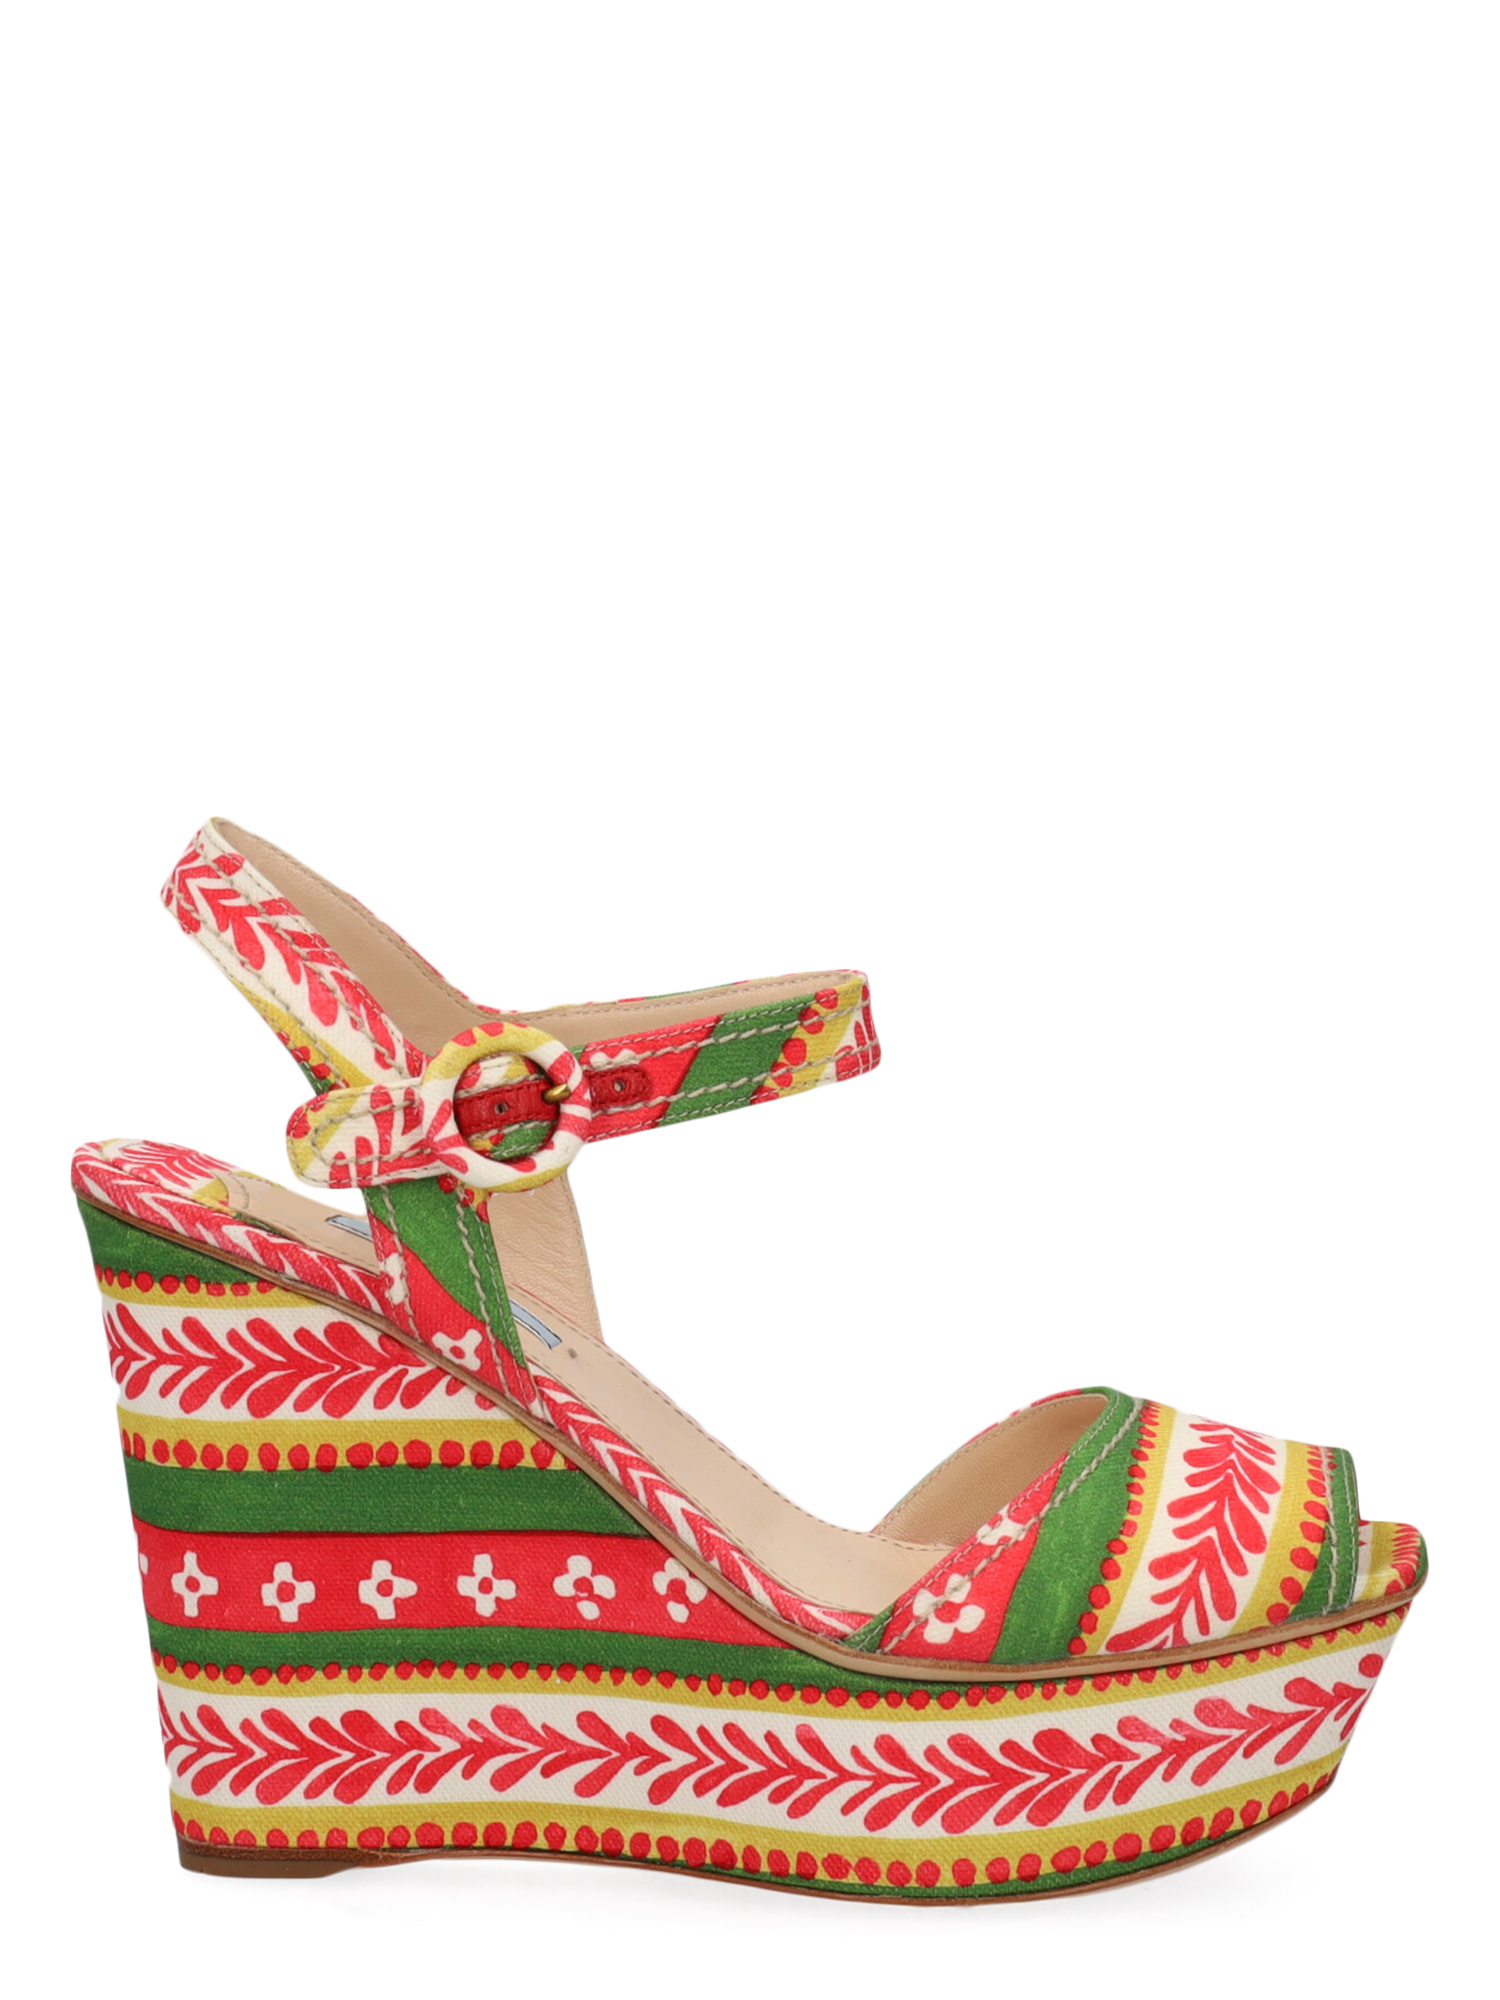 Pre-owned Prada Women's Wedges -  - In Green, Red Fabric